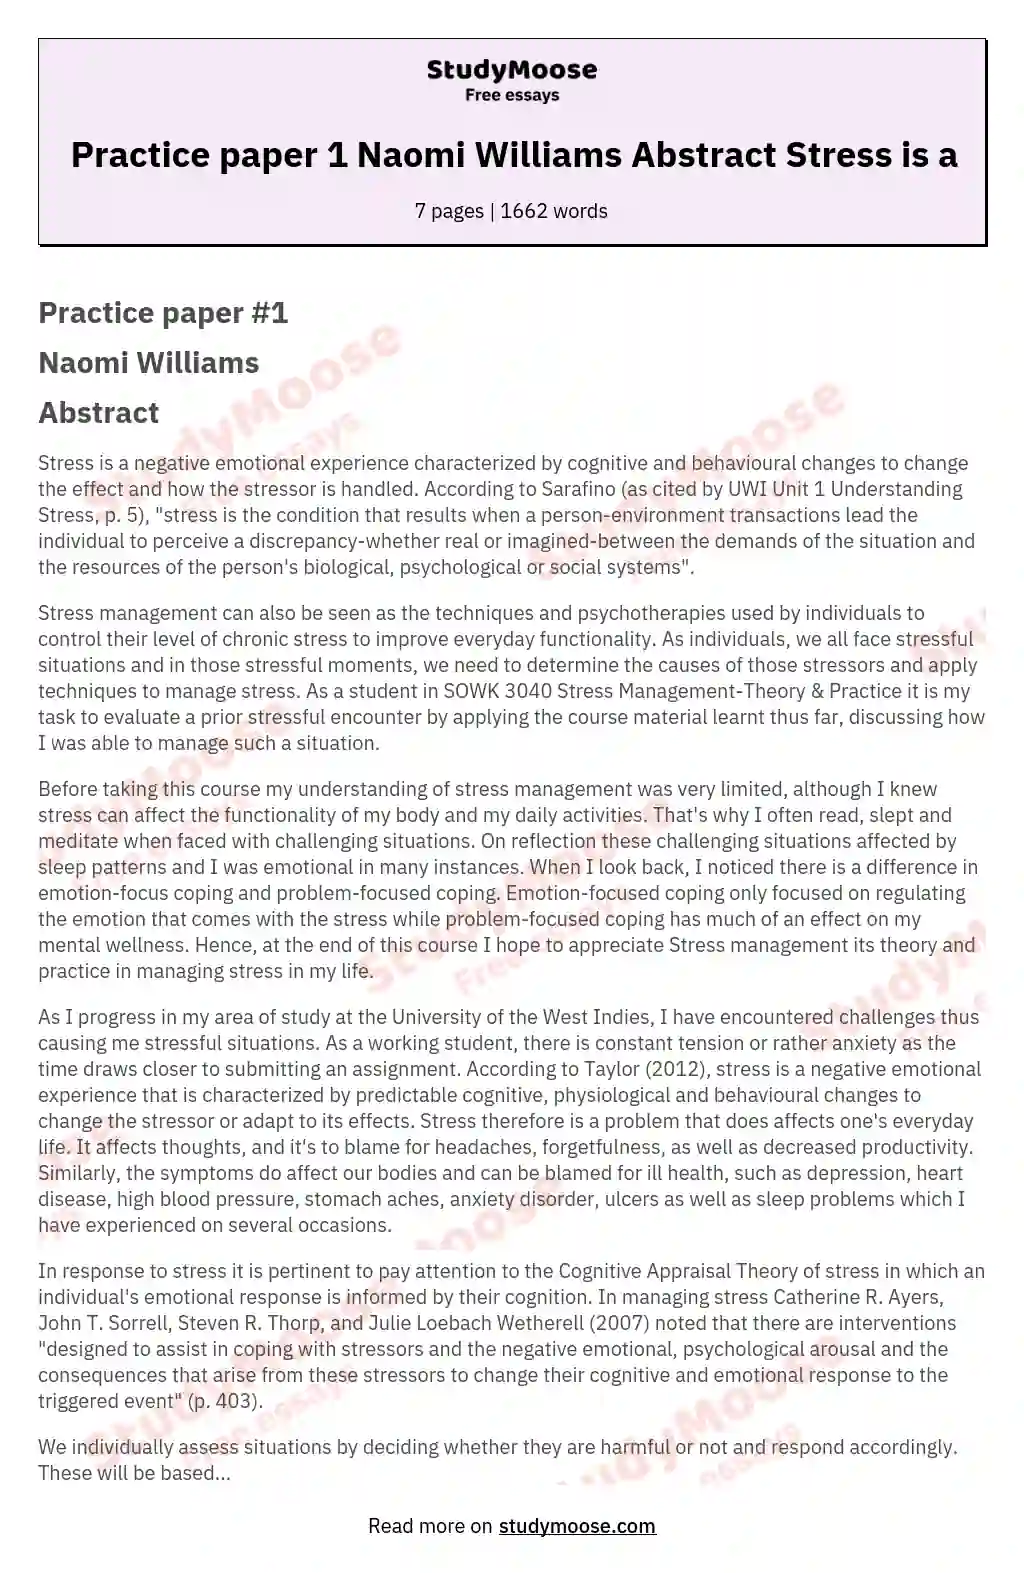 Practice paper 1 Naomi Williams Abstract Stress is a essay